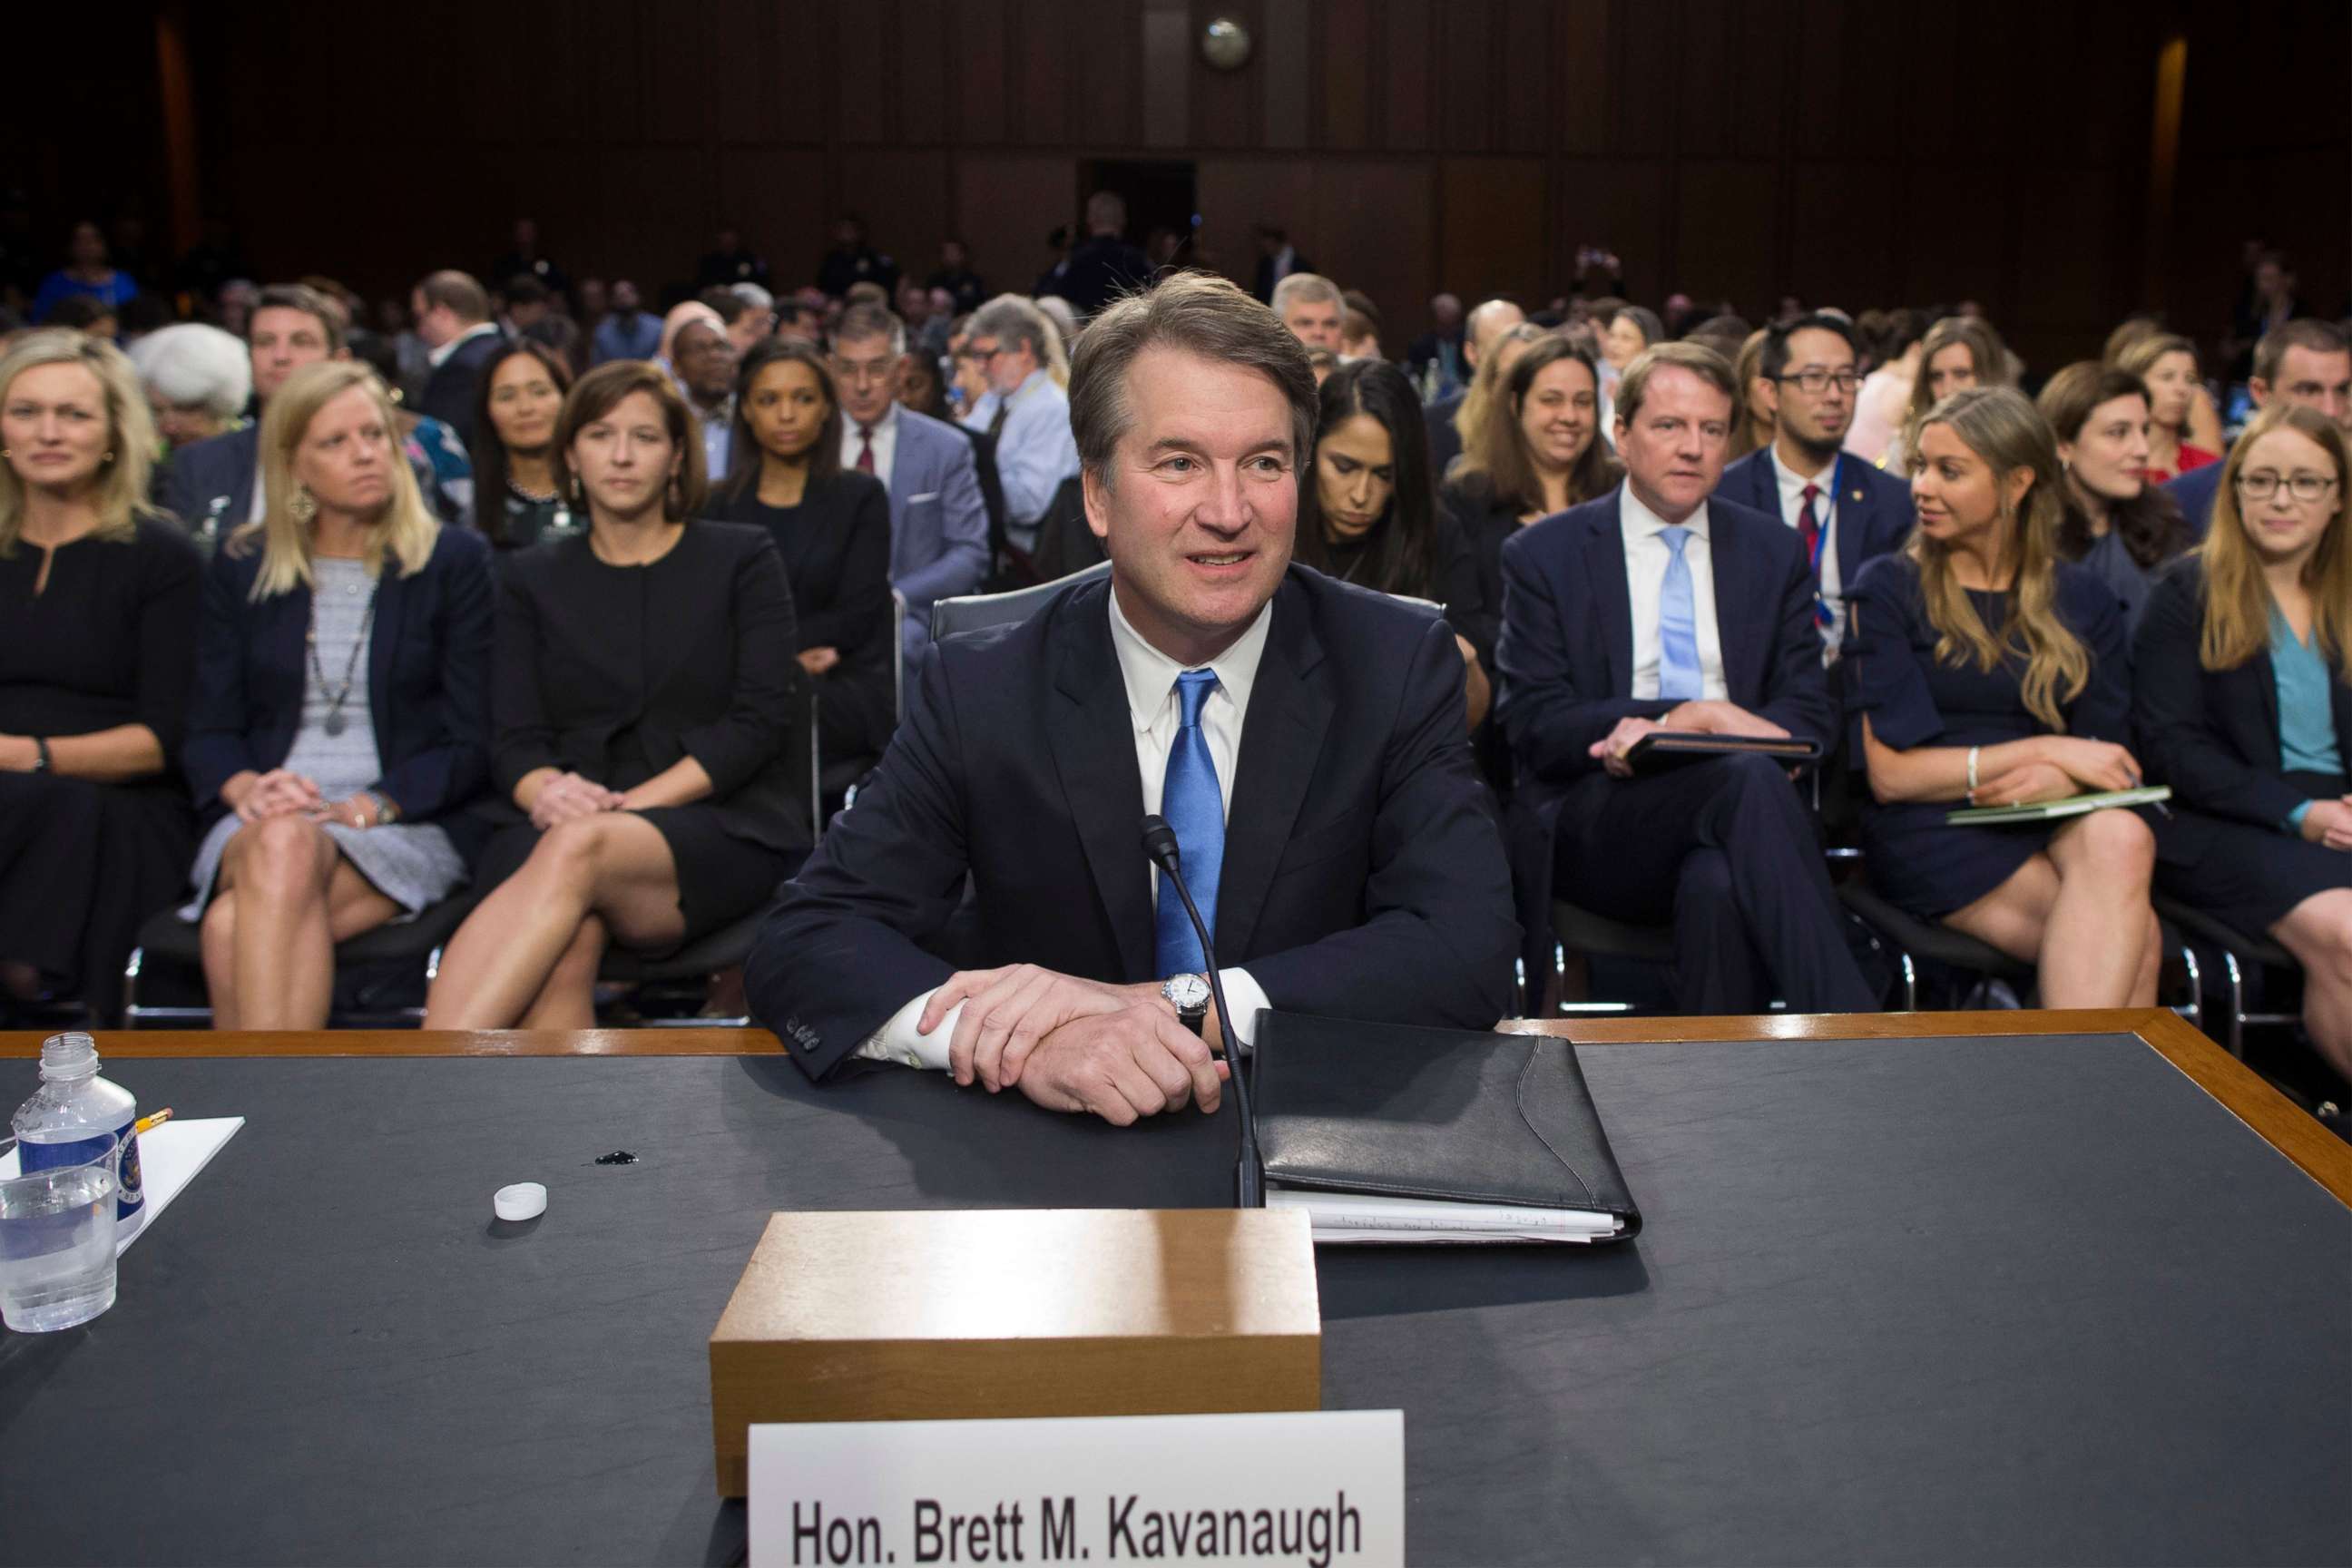 PHOTO: Circuit judge Brett Kavanaugh appears before the Senate Judiciary Committee's confirmation hearing on his nomination to be an Associate Justice of the Supreme Court of the United States in Washington, Sept. 5, 2018.